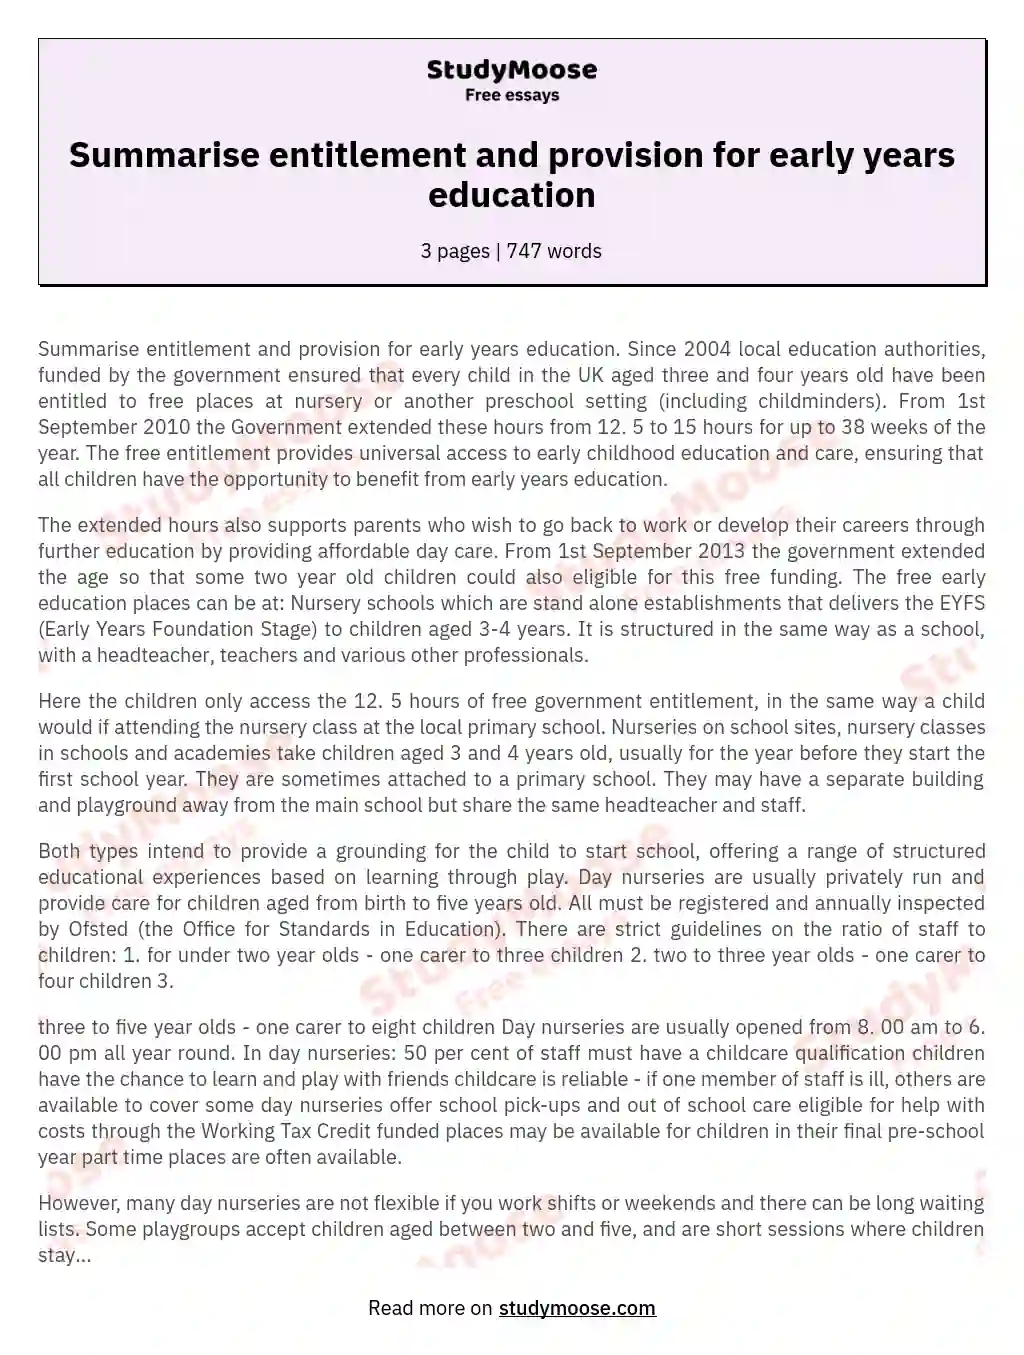 Summarise entitlement and provision for early years education essay